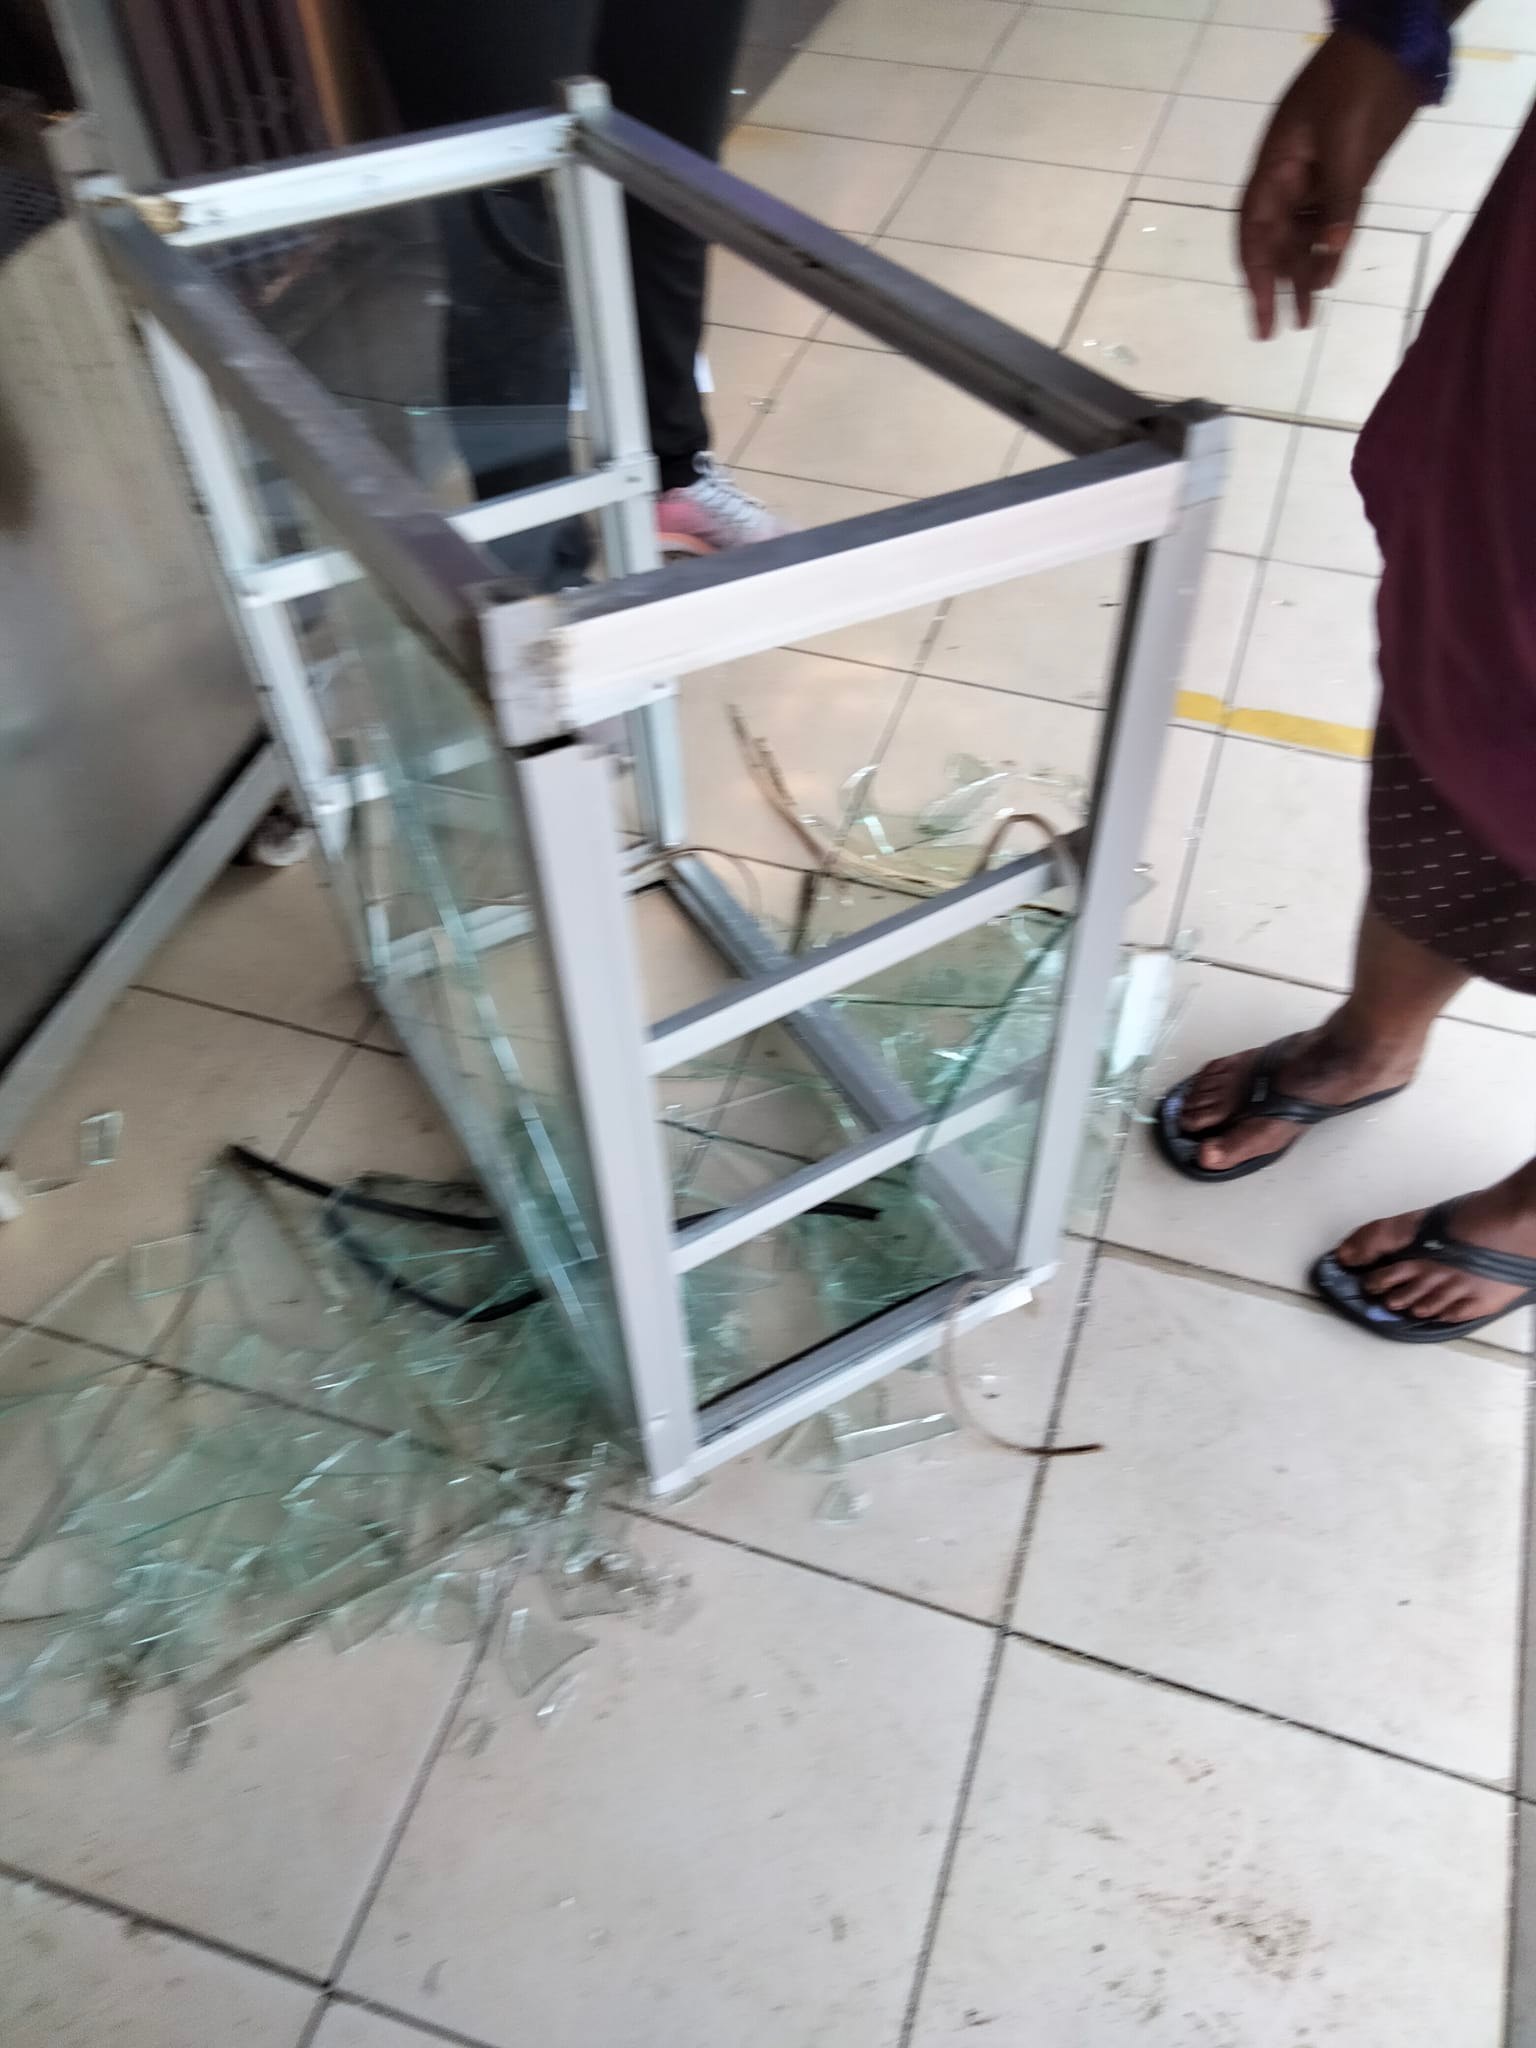 Items damaged by the man wielding a stick in the kopitiam include a temperature scanner, a cash register machine and a glass shelf.